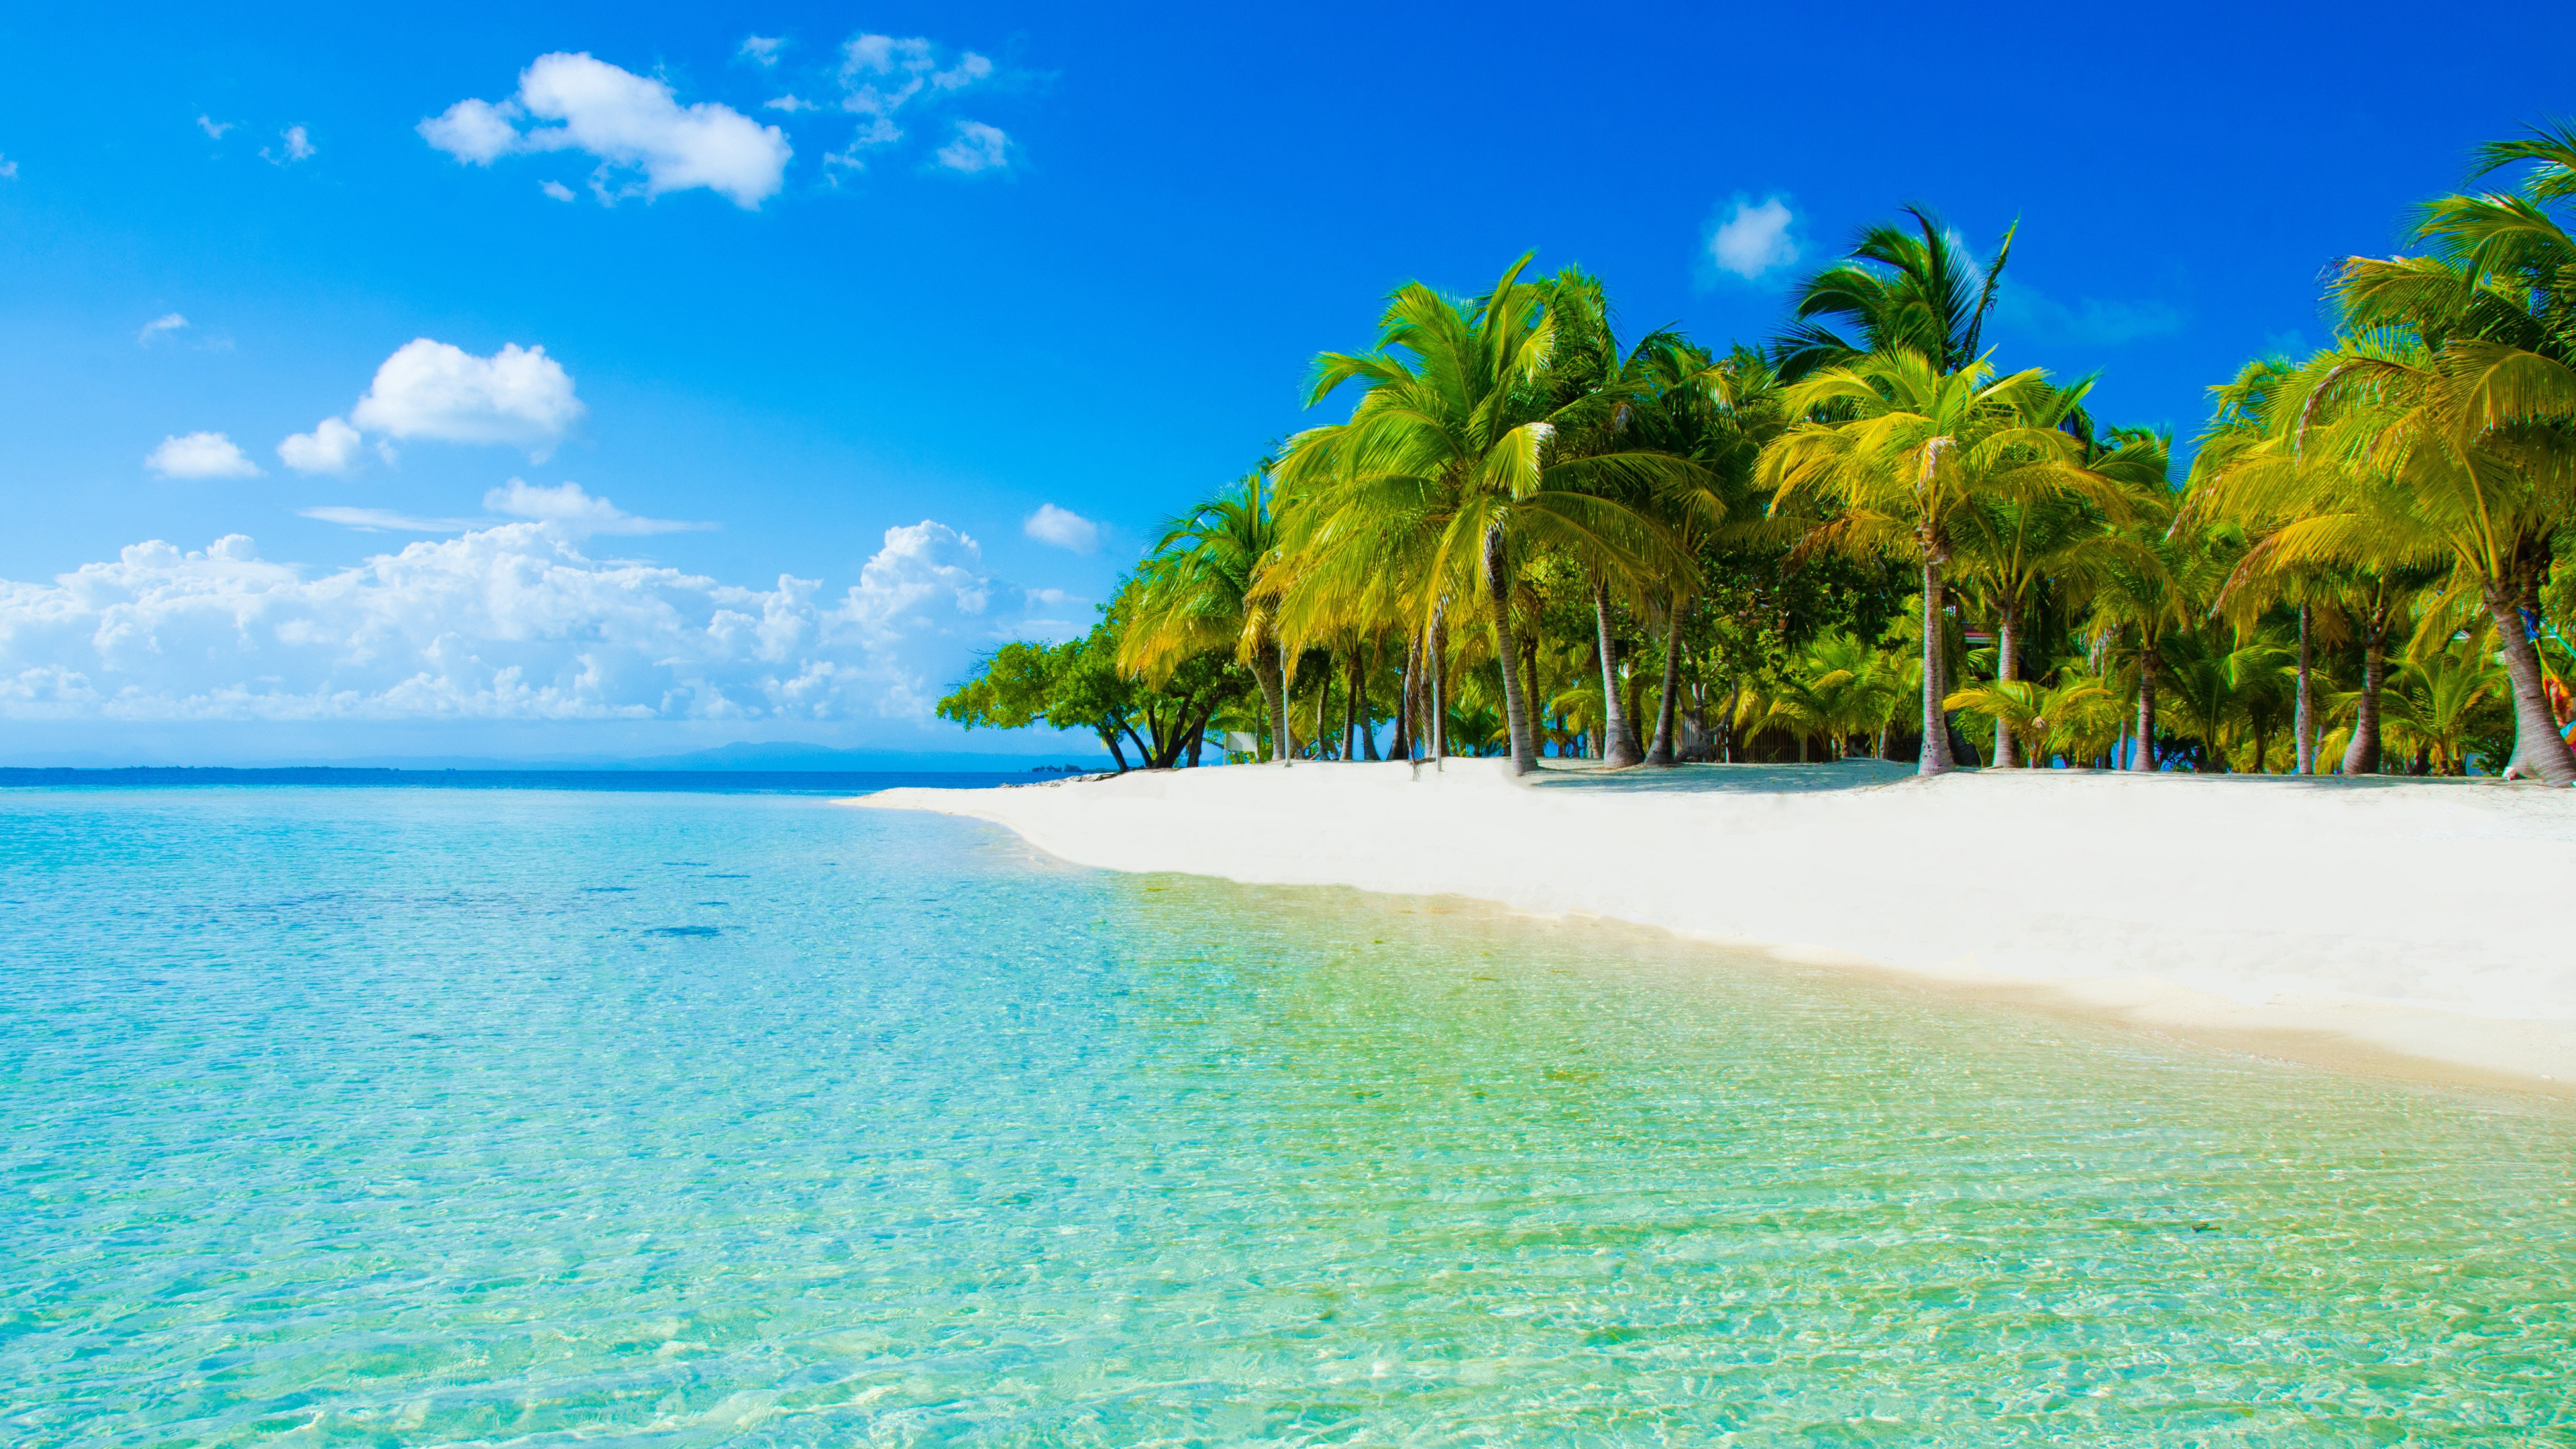 Green Palm Tree on White Sand Beach During Daytime. Wallpaper in 3840x2160 Resolution